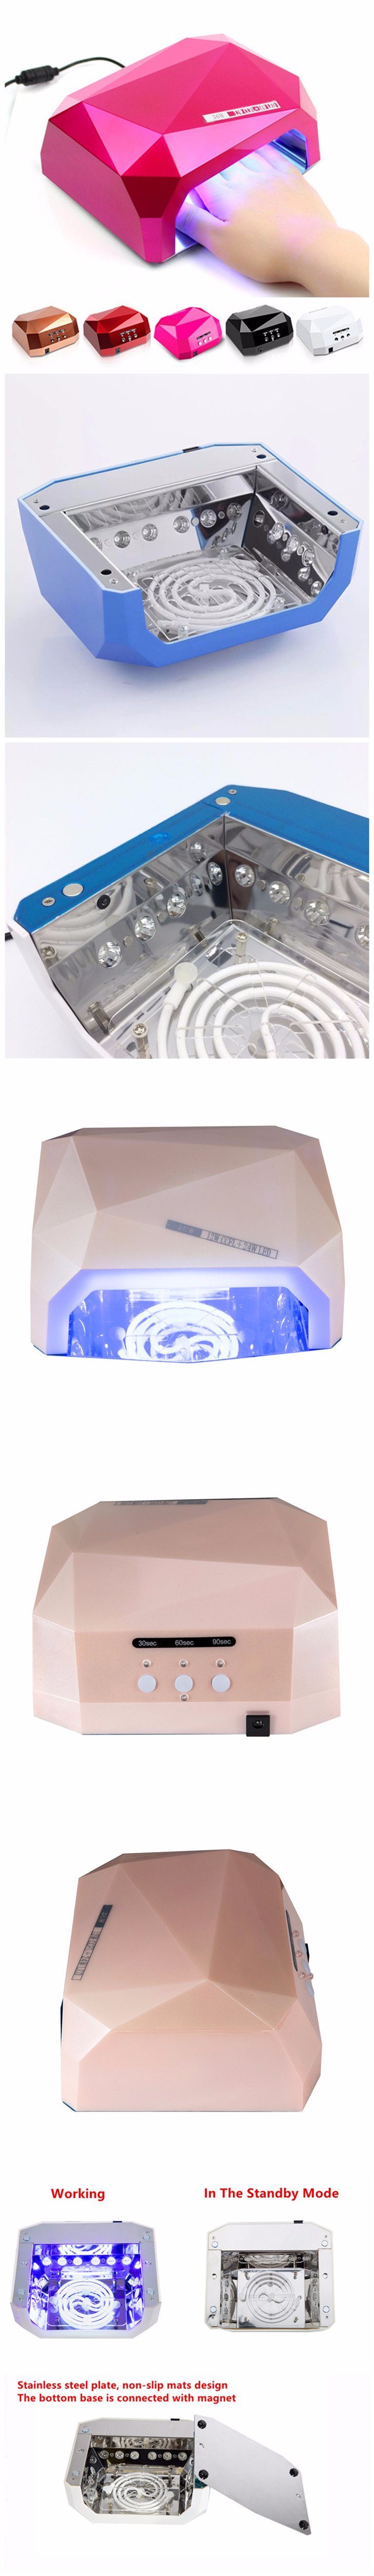 Professional Salon Use Nail Dryer Curing Fast UV Lamp for Gel